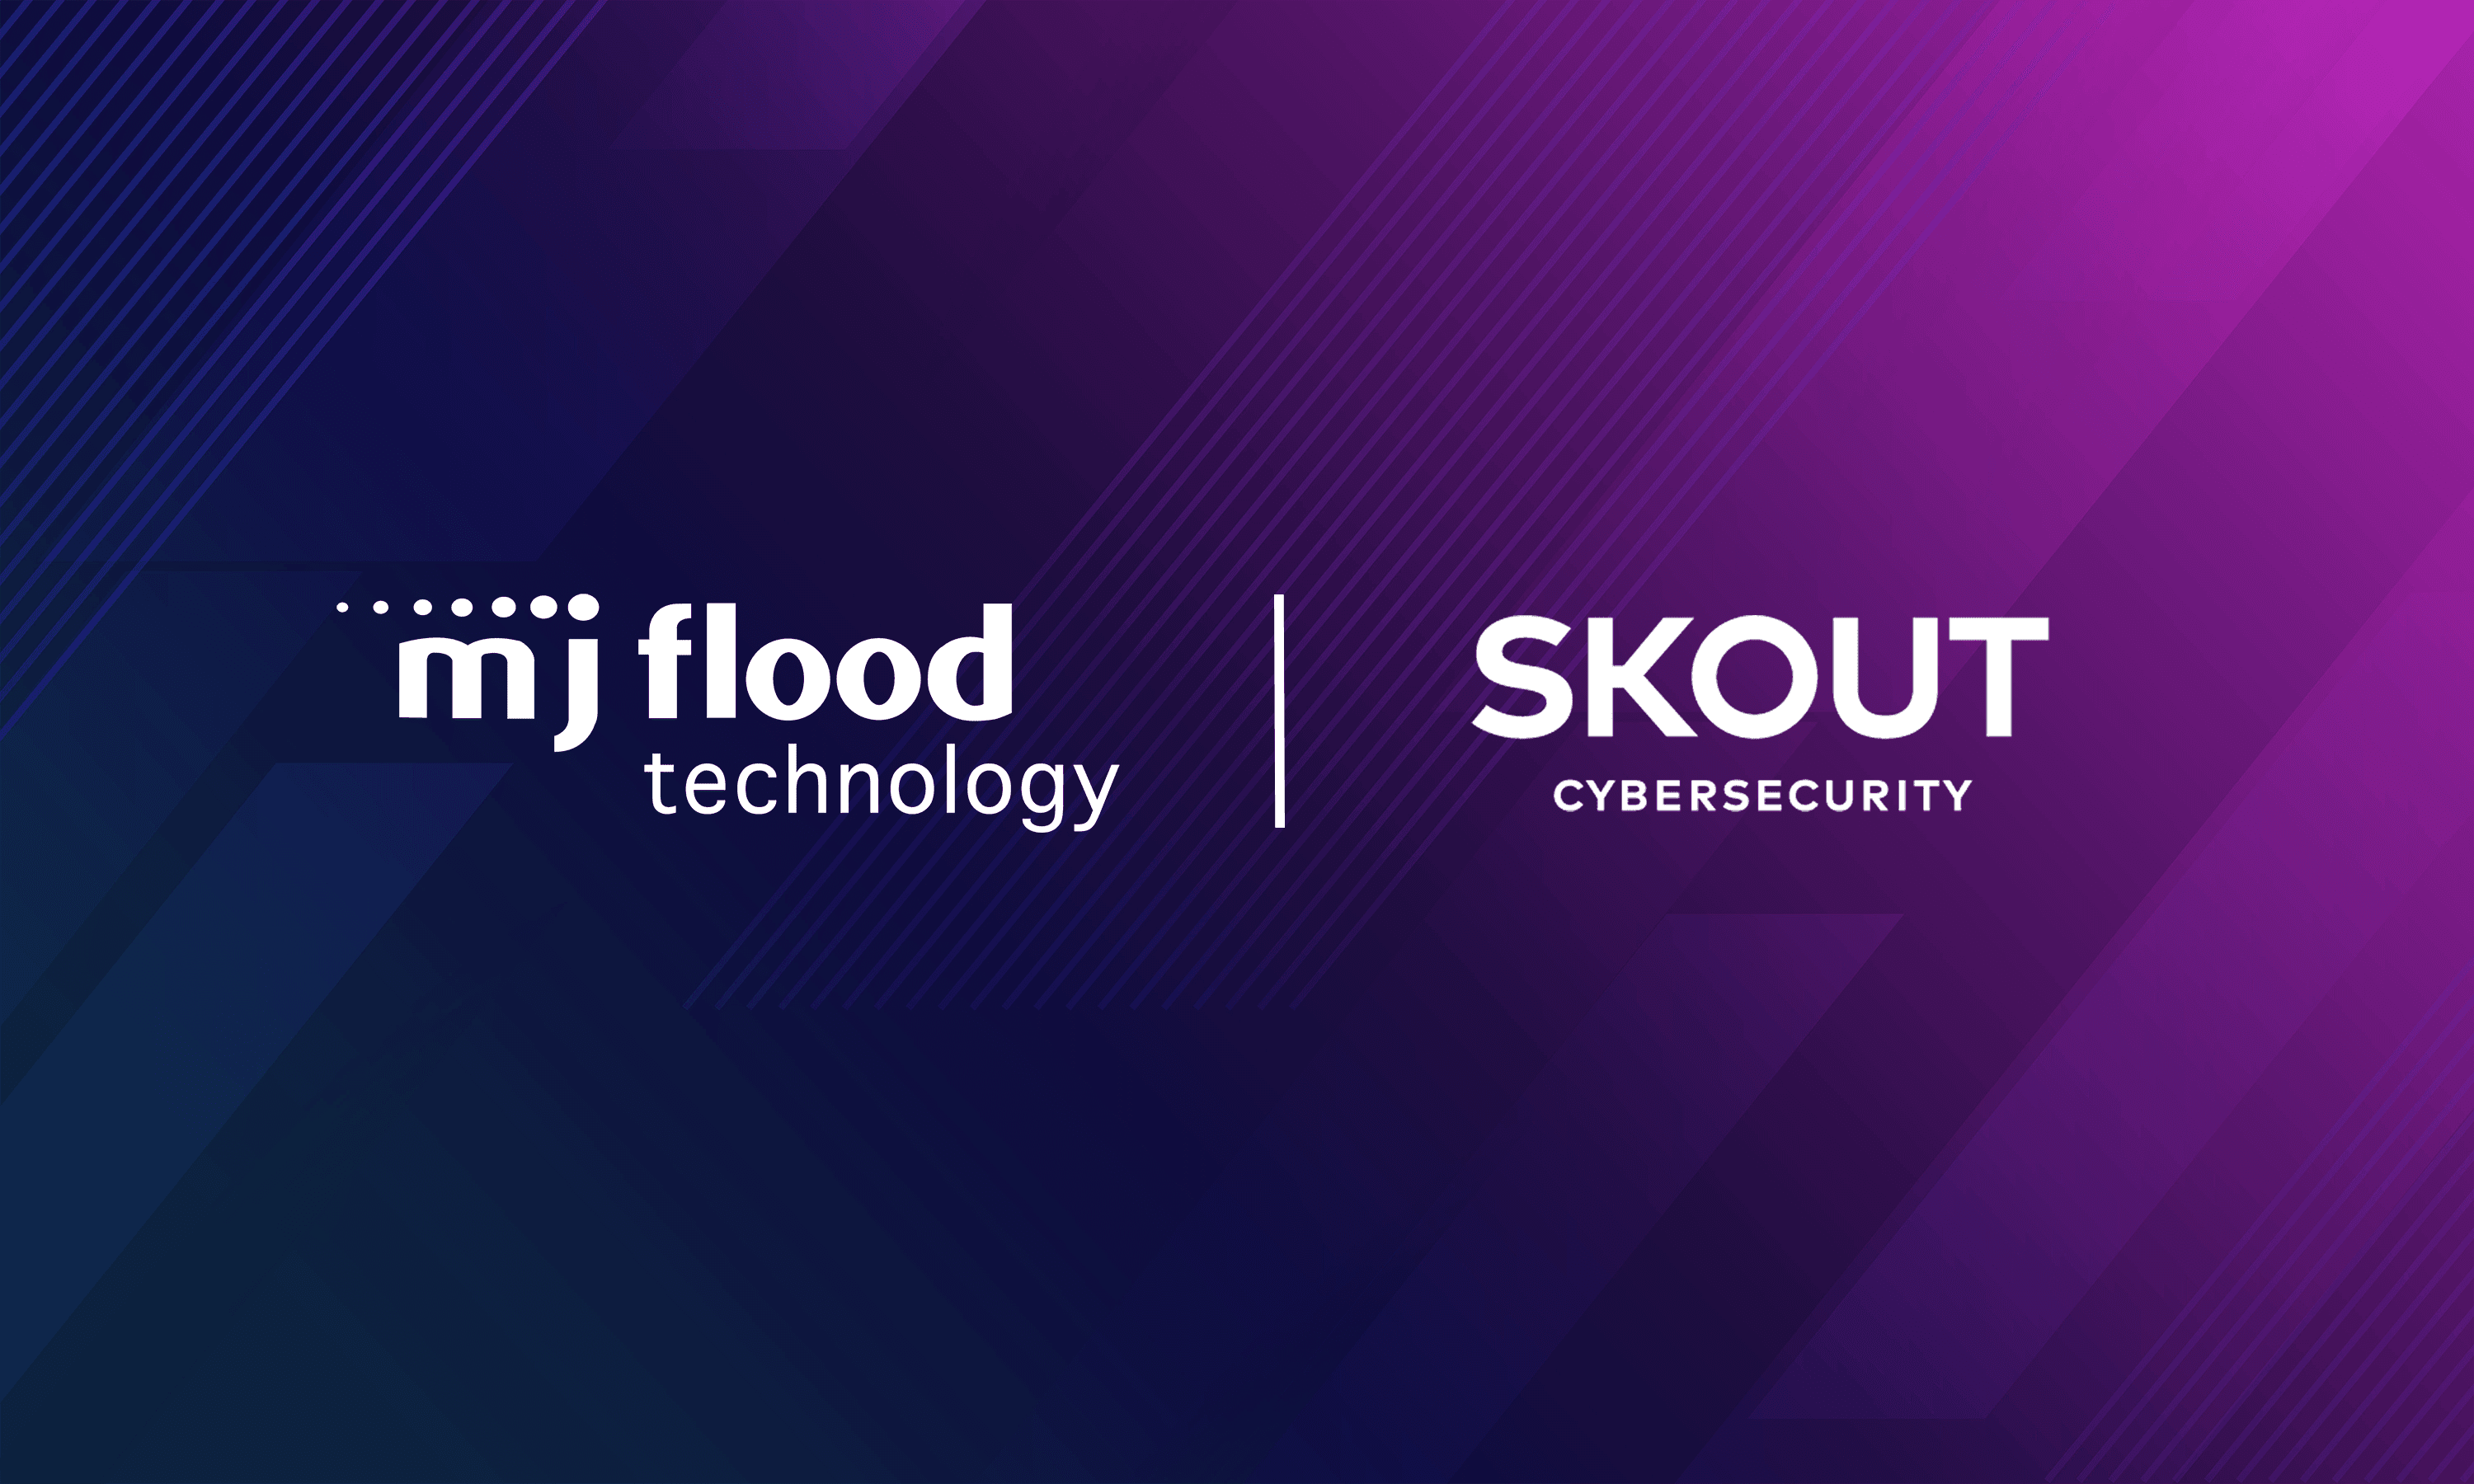 New Partner Announcement – SKOUT Cybersecurity